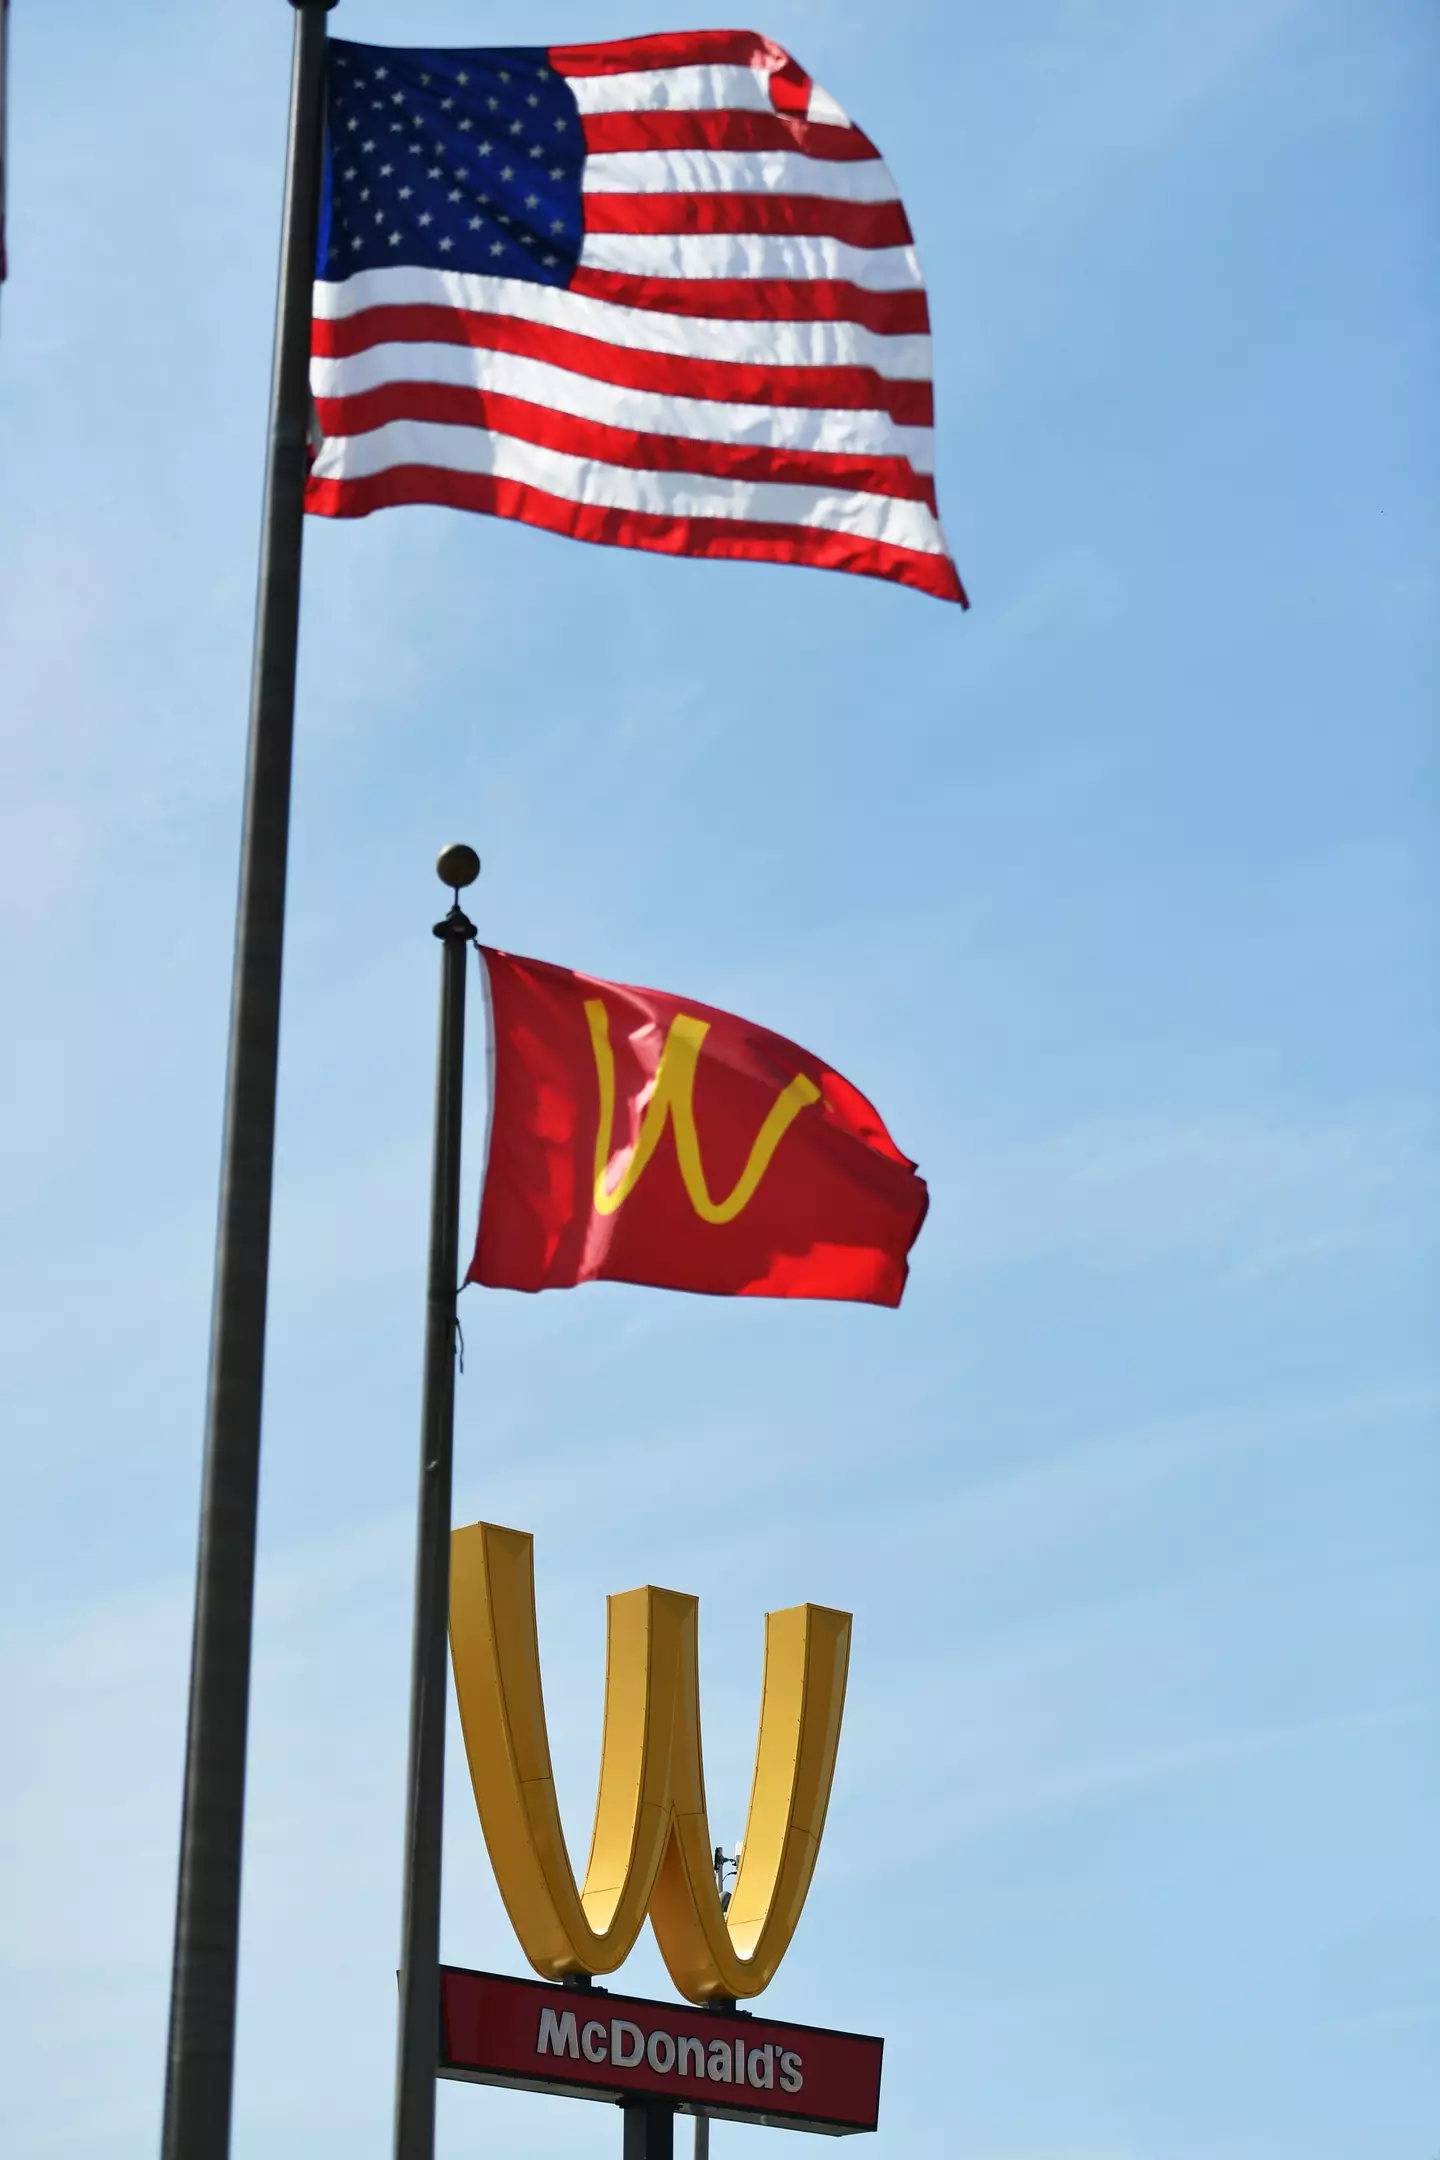 The golden arches were flipped upside down to make a statement.